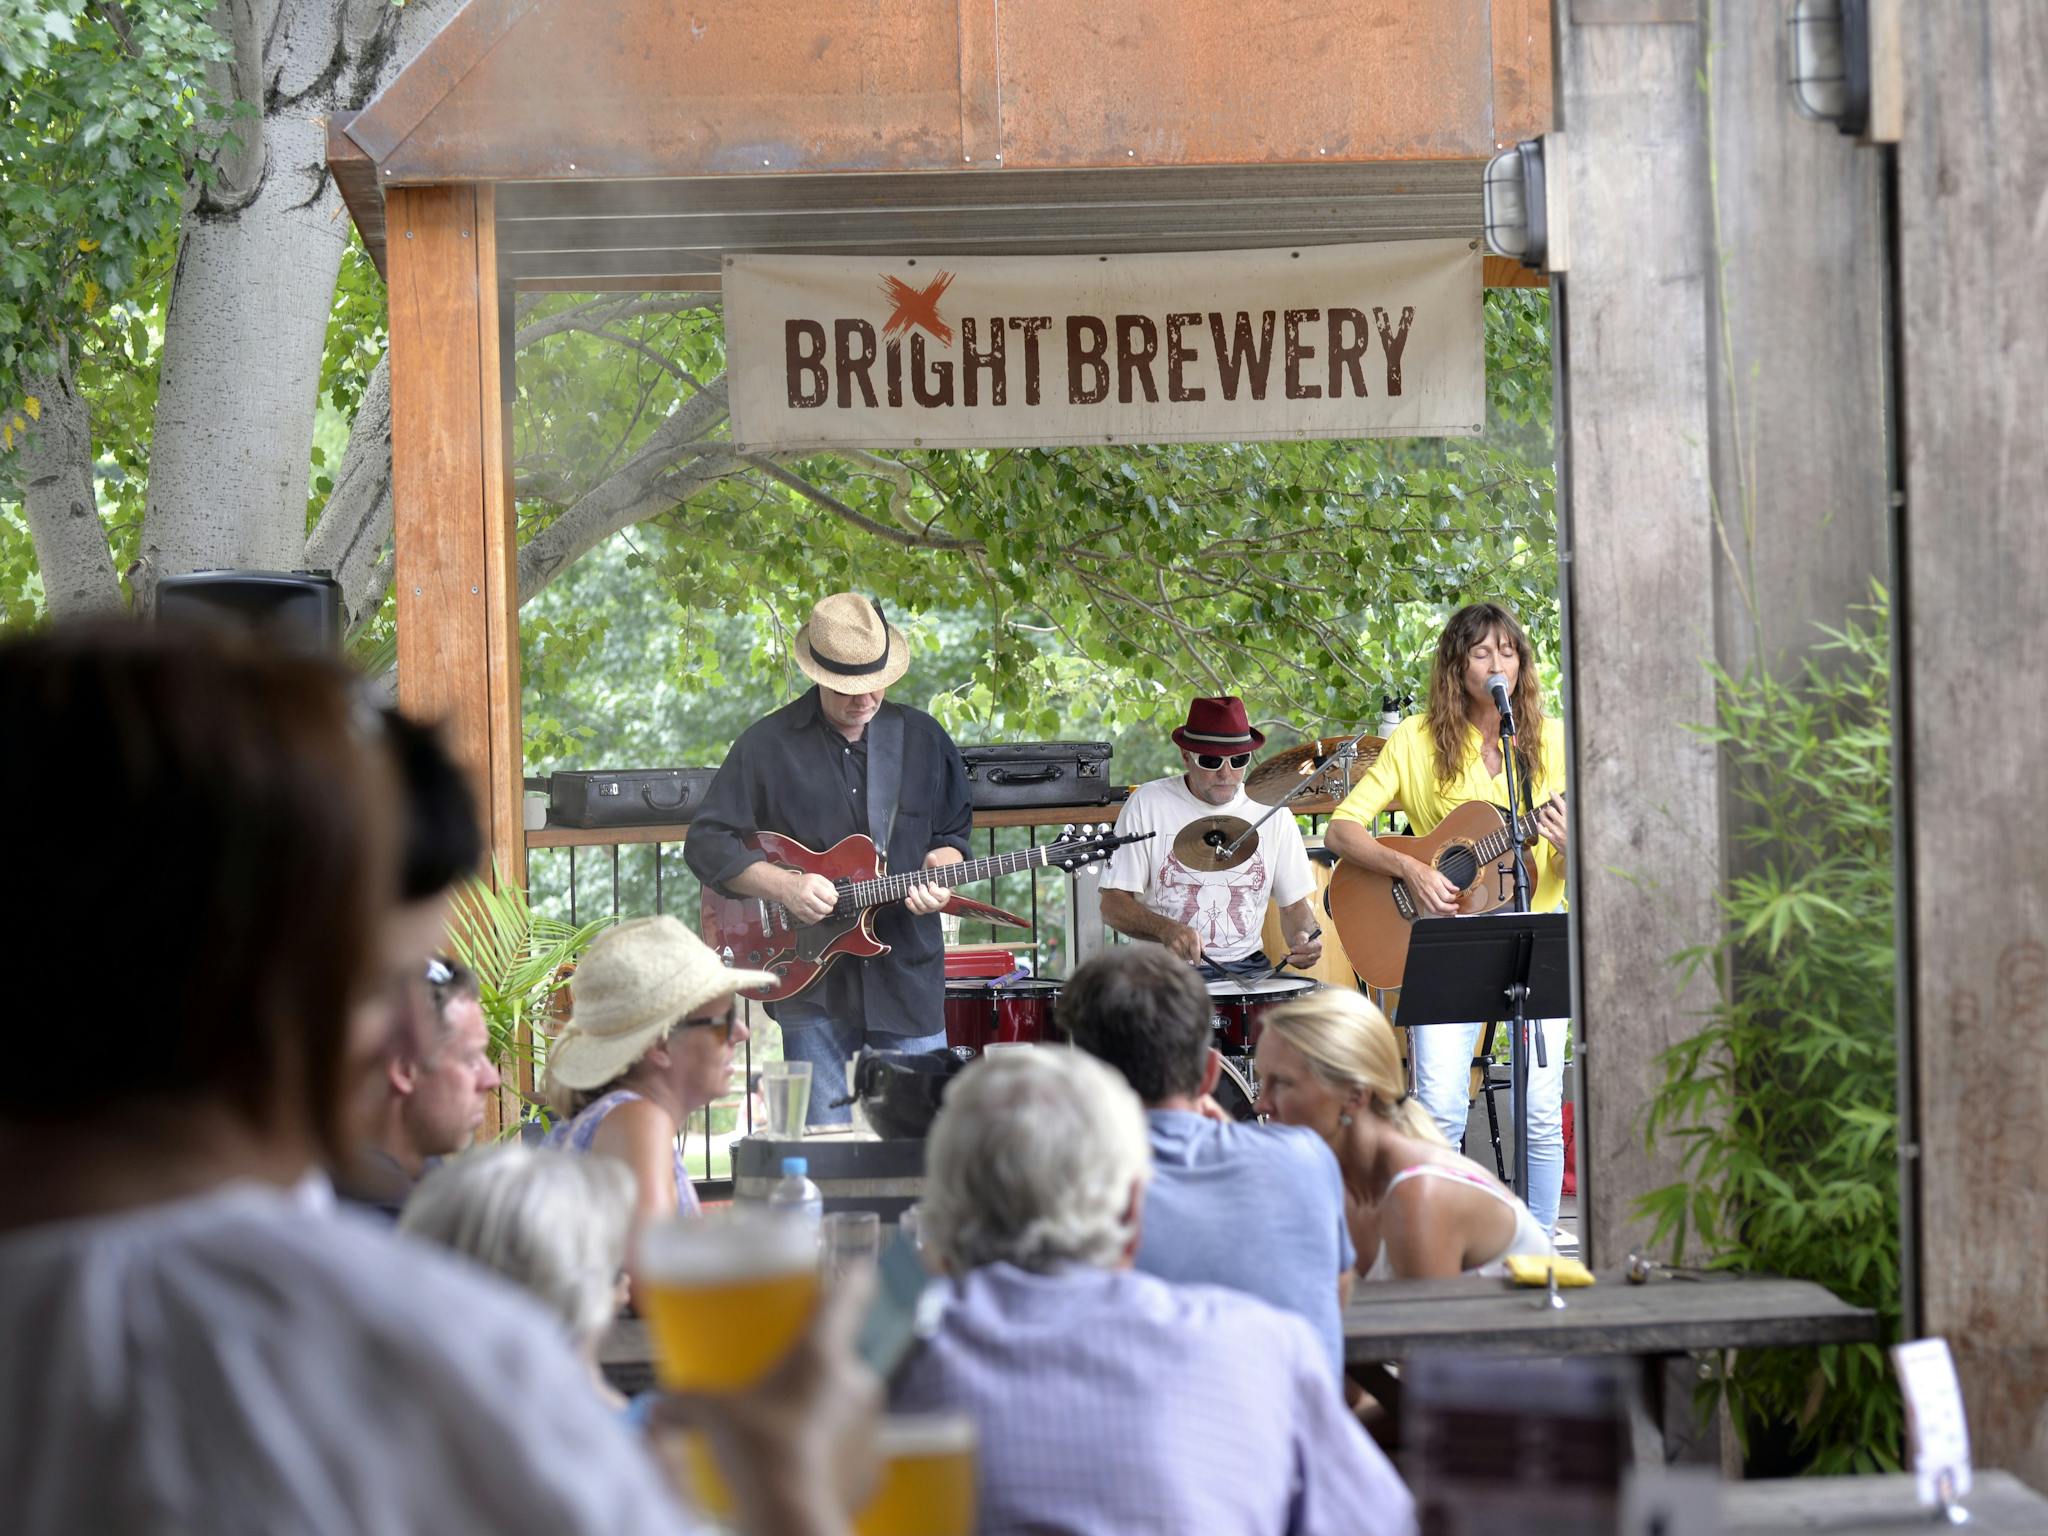 Onlookers watch a band play at Bright Brewery